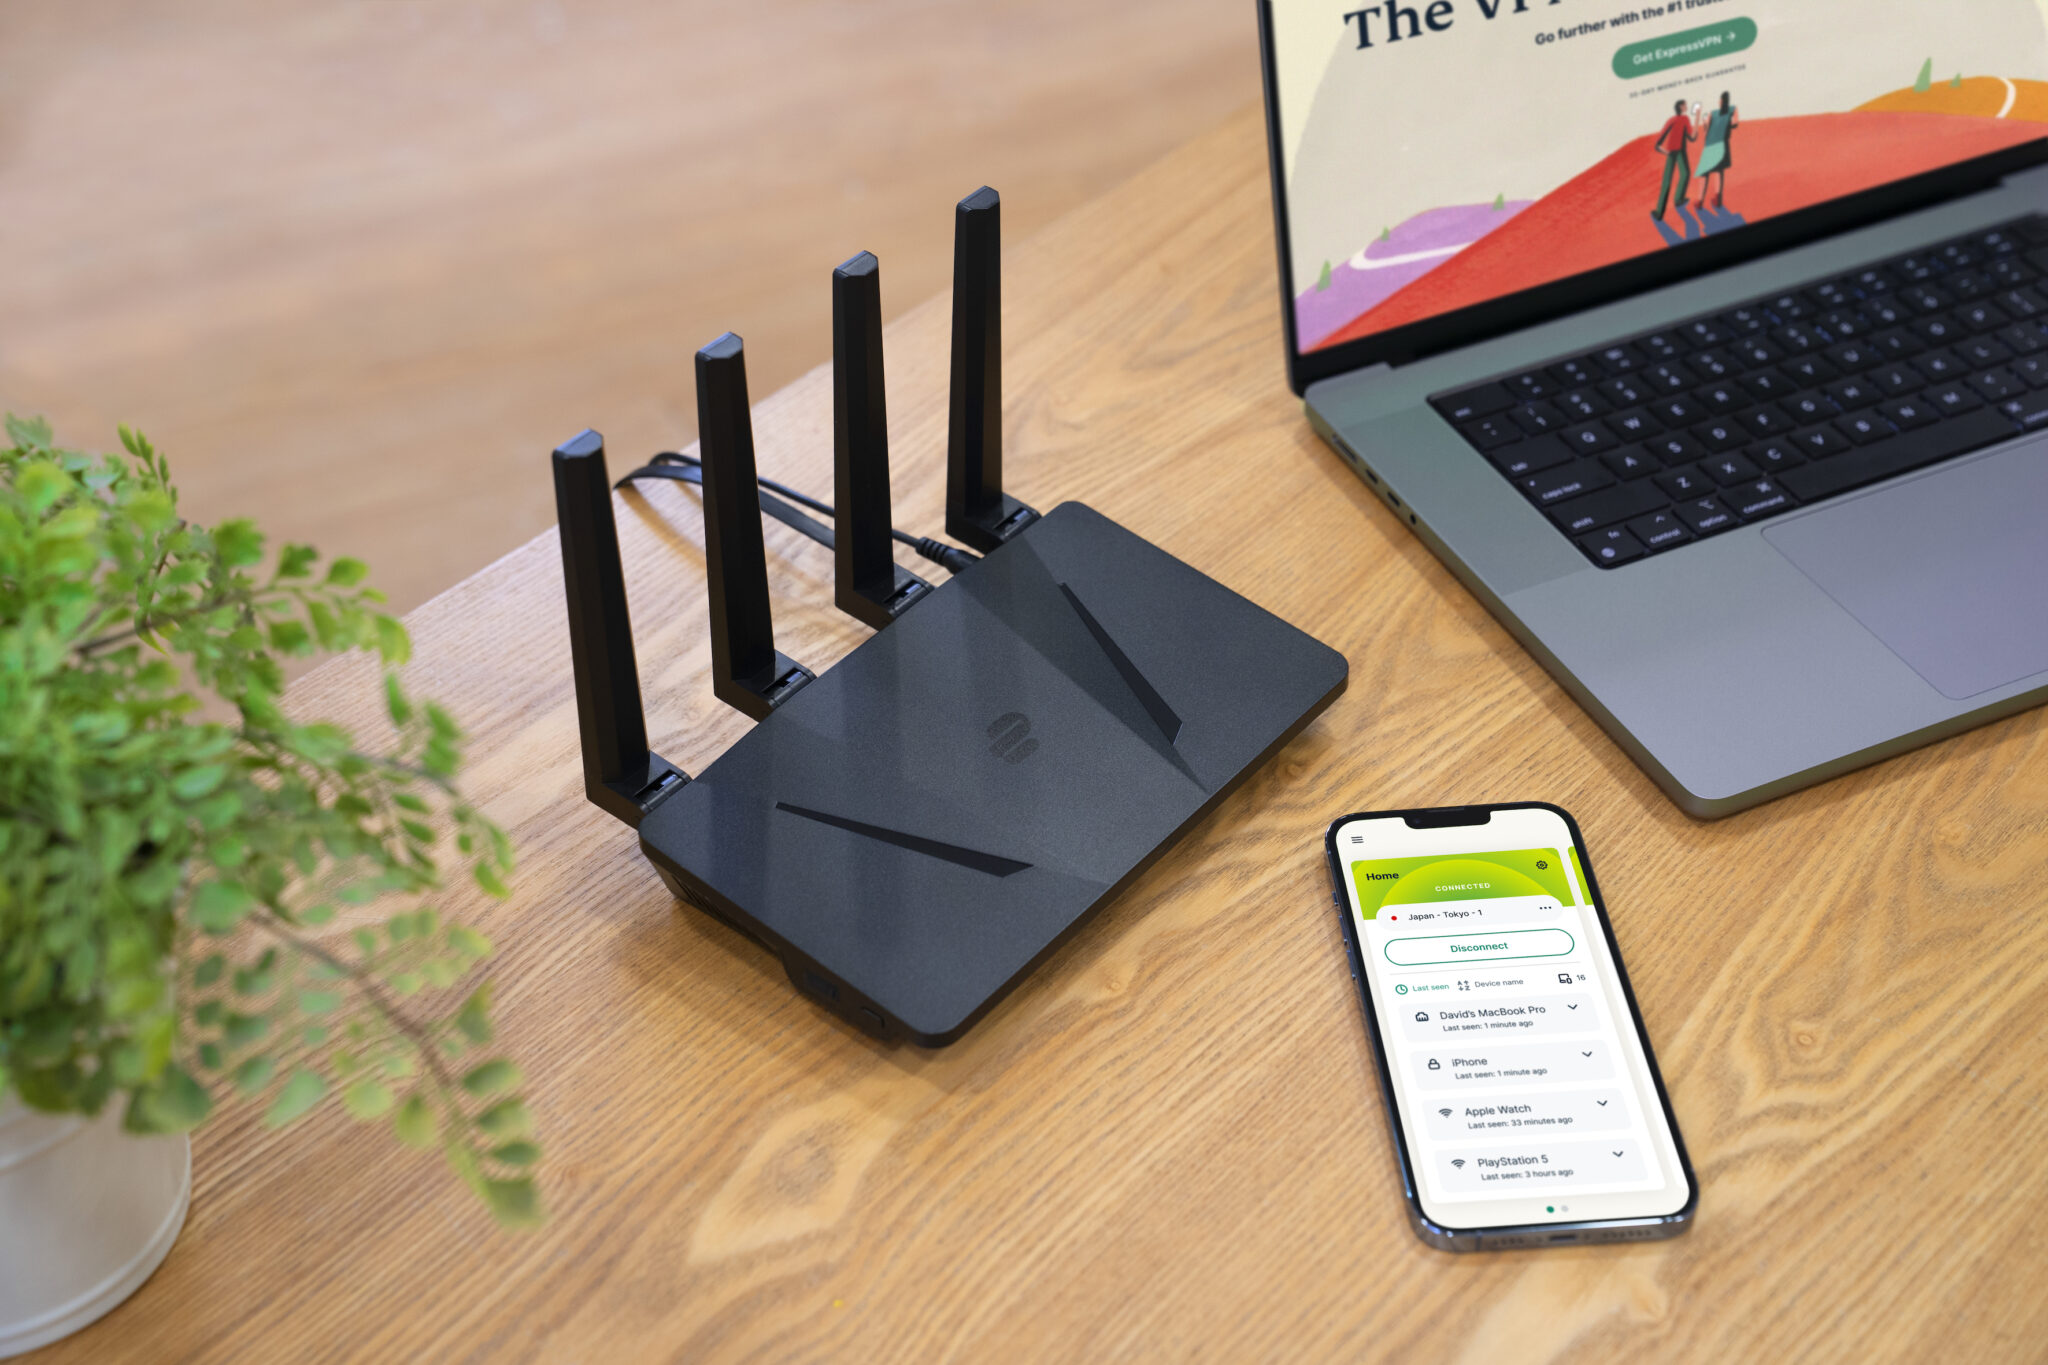 date Articulation Wolf in sheep's clothing ExpressVPN launches Aircove, a Wi-Fi 6 router with built-in VPN protection